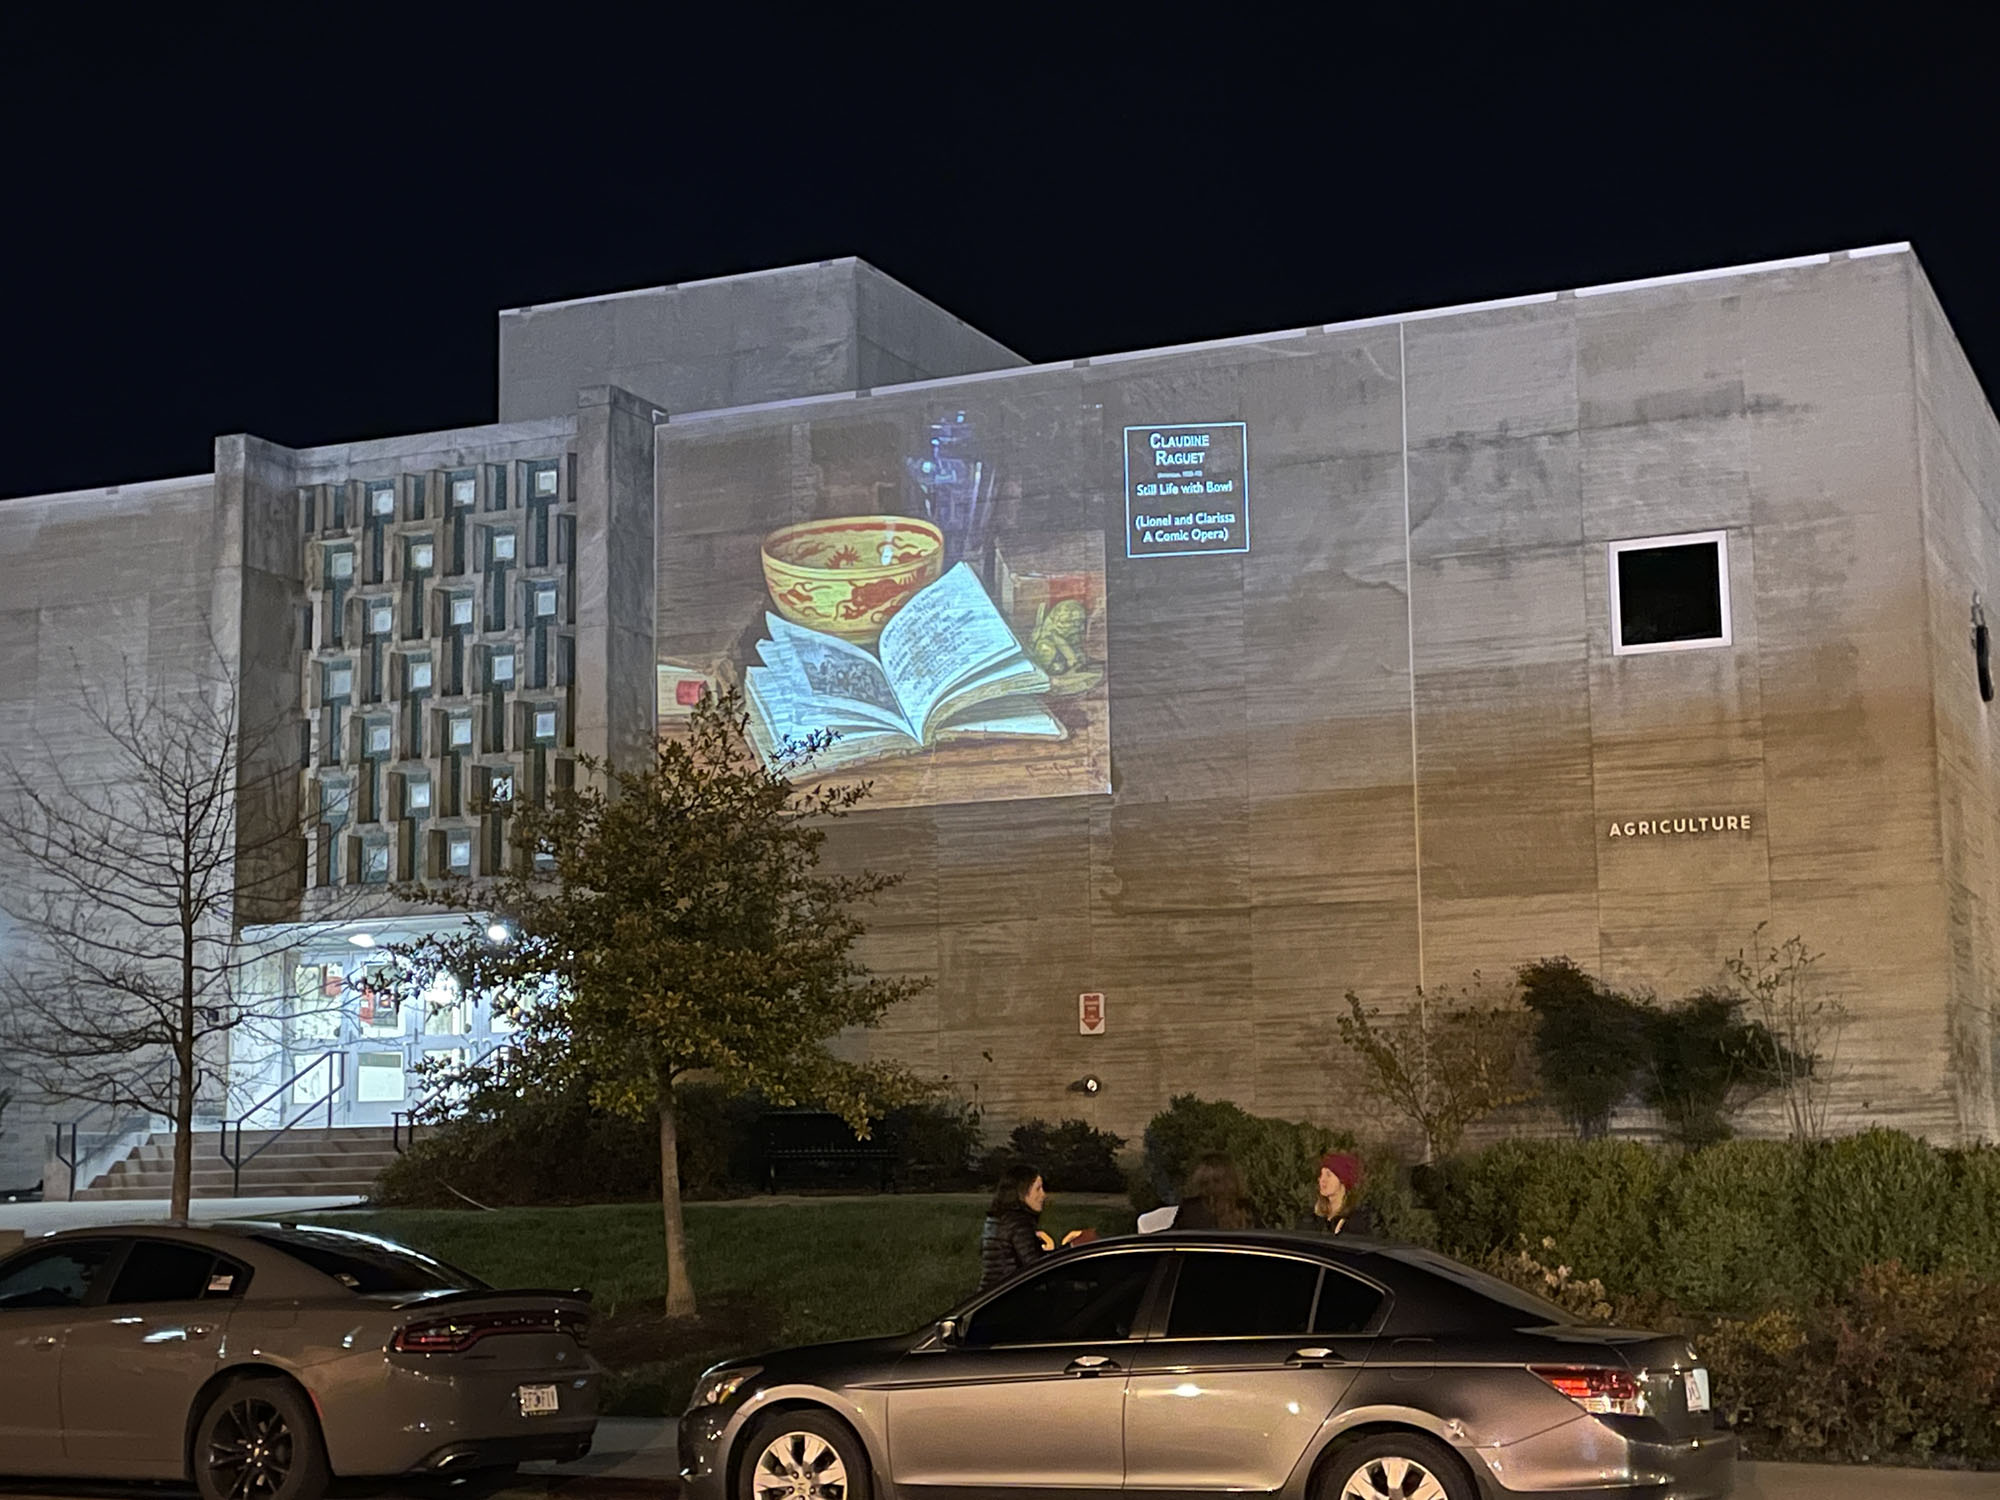 photo of a piece of art being projected on the side of a building at night